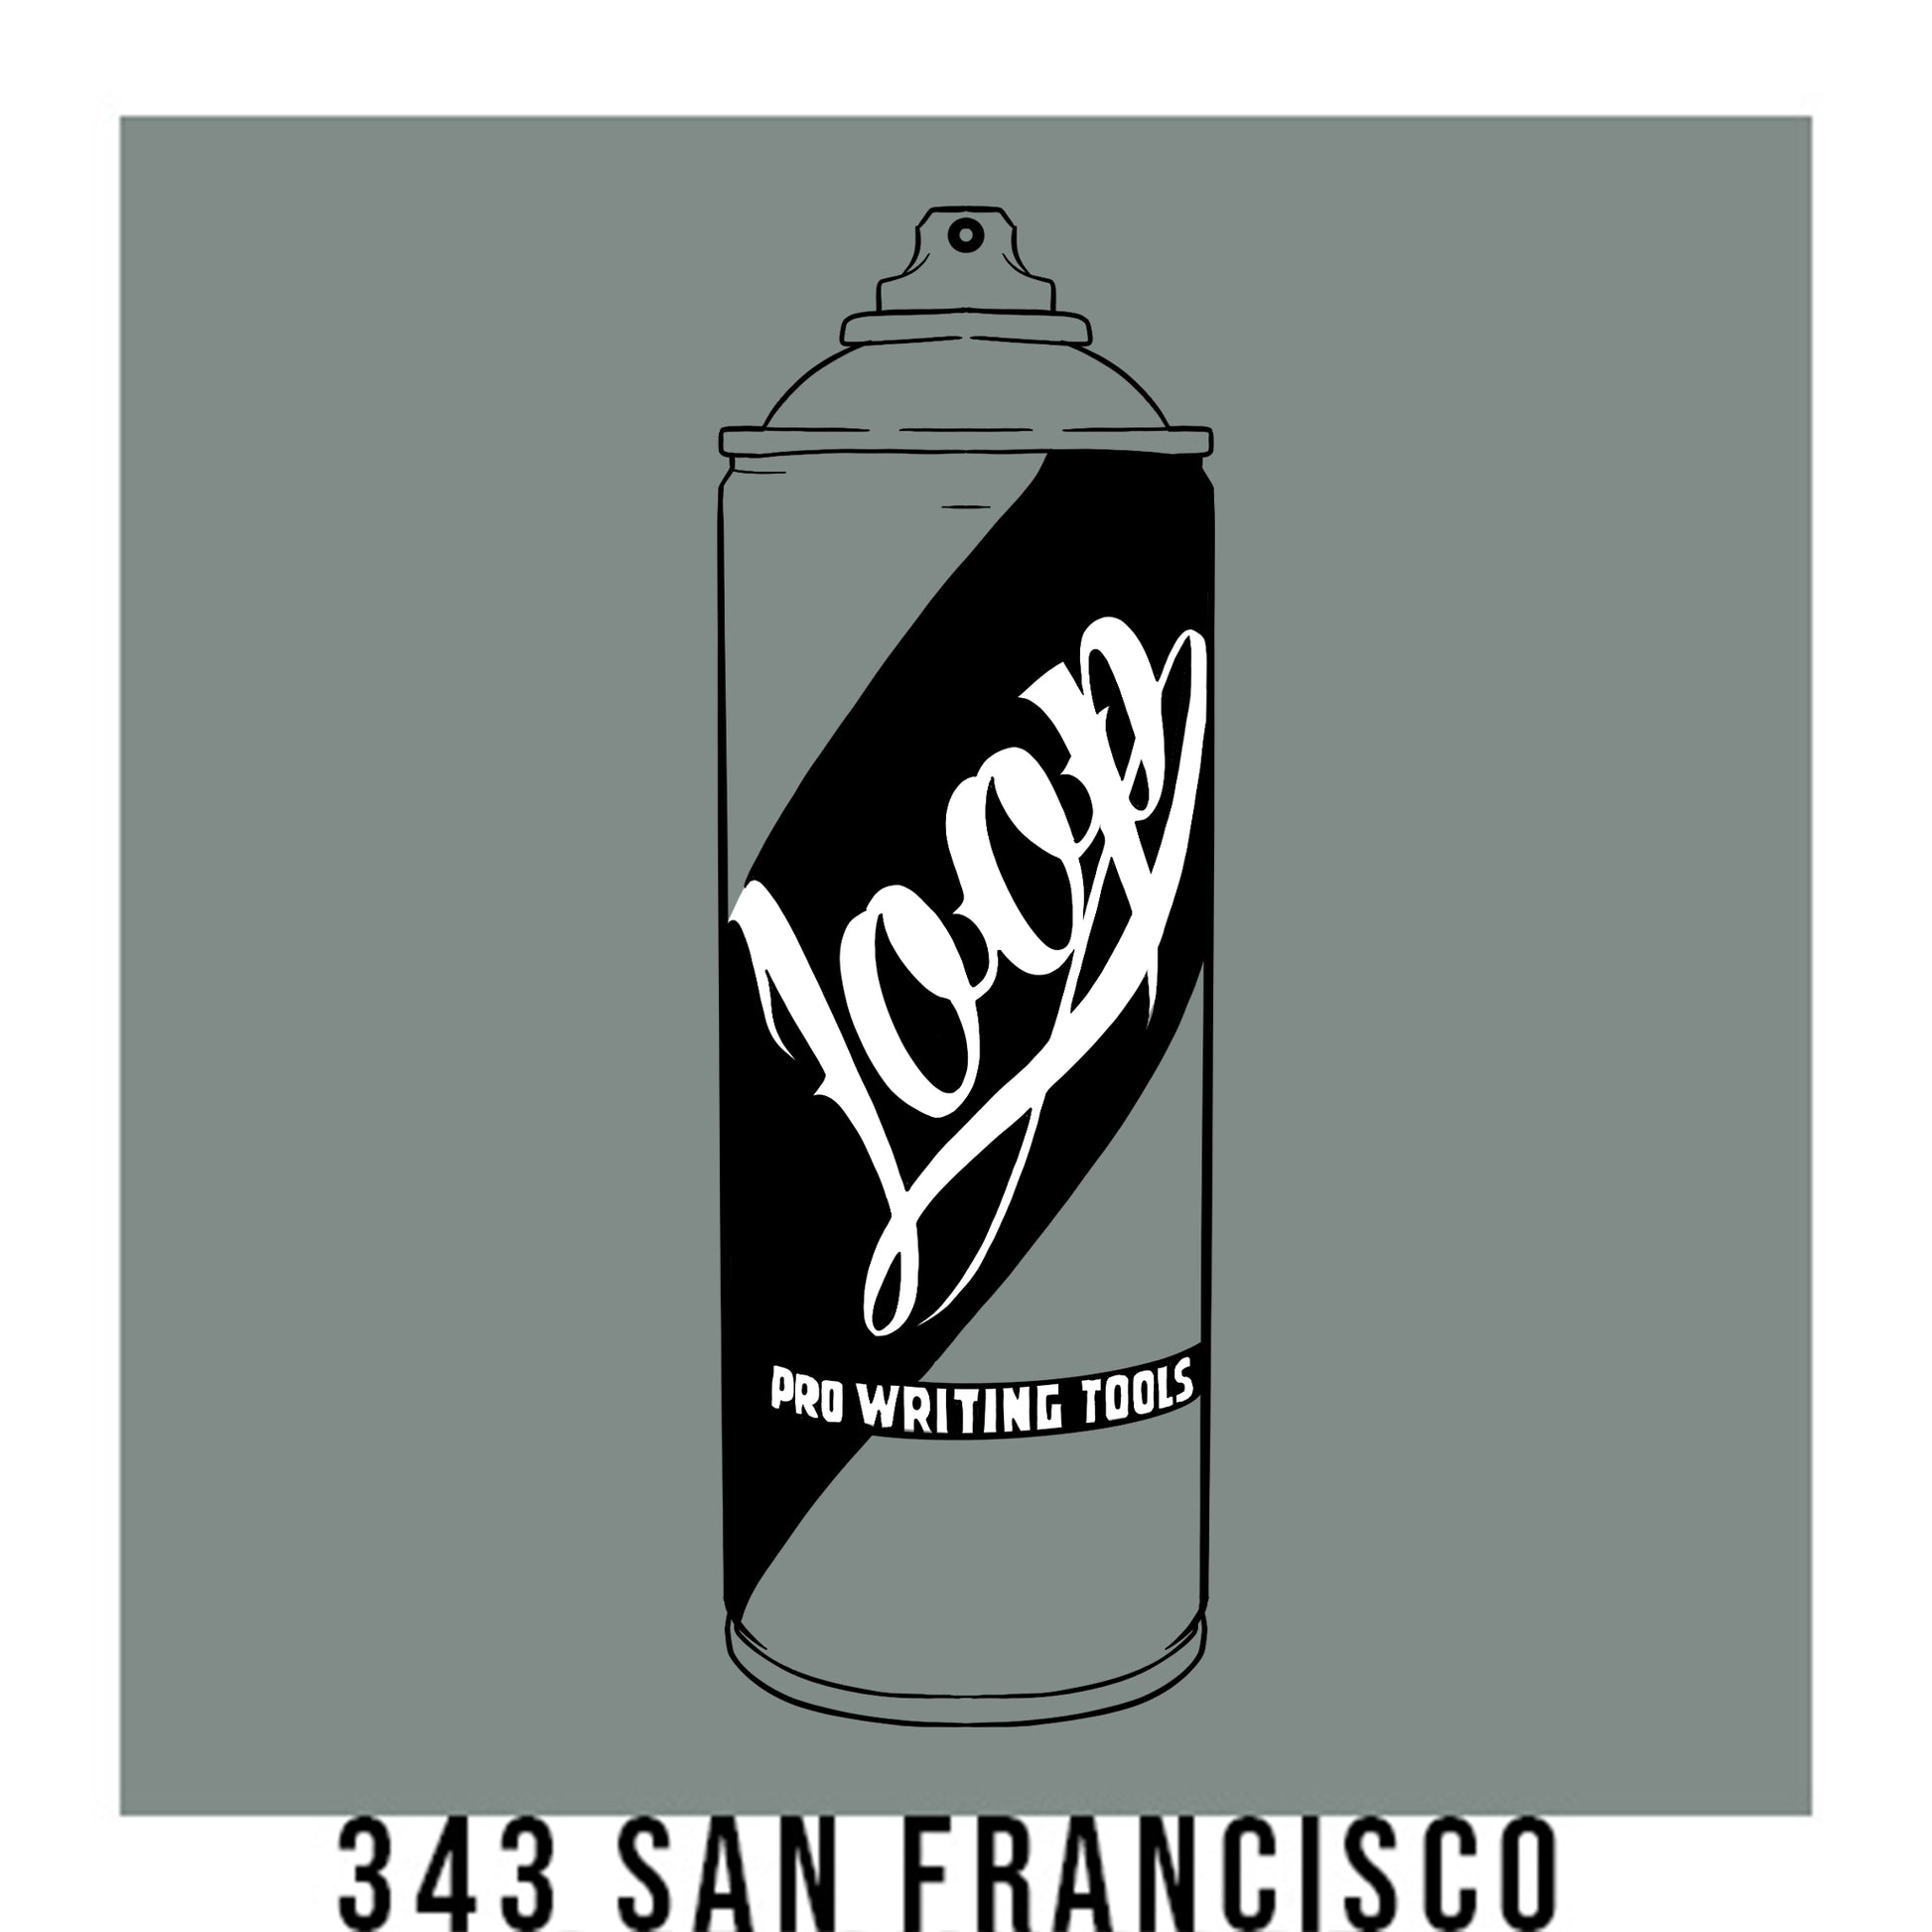 A black outline drawing of a grey spray paint can with the word "Loop" written on the face in script. The background is a color swatch of the same grey with a white border with the words "343 San Francisco" at the bottom.